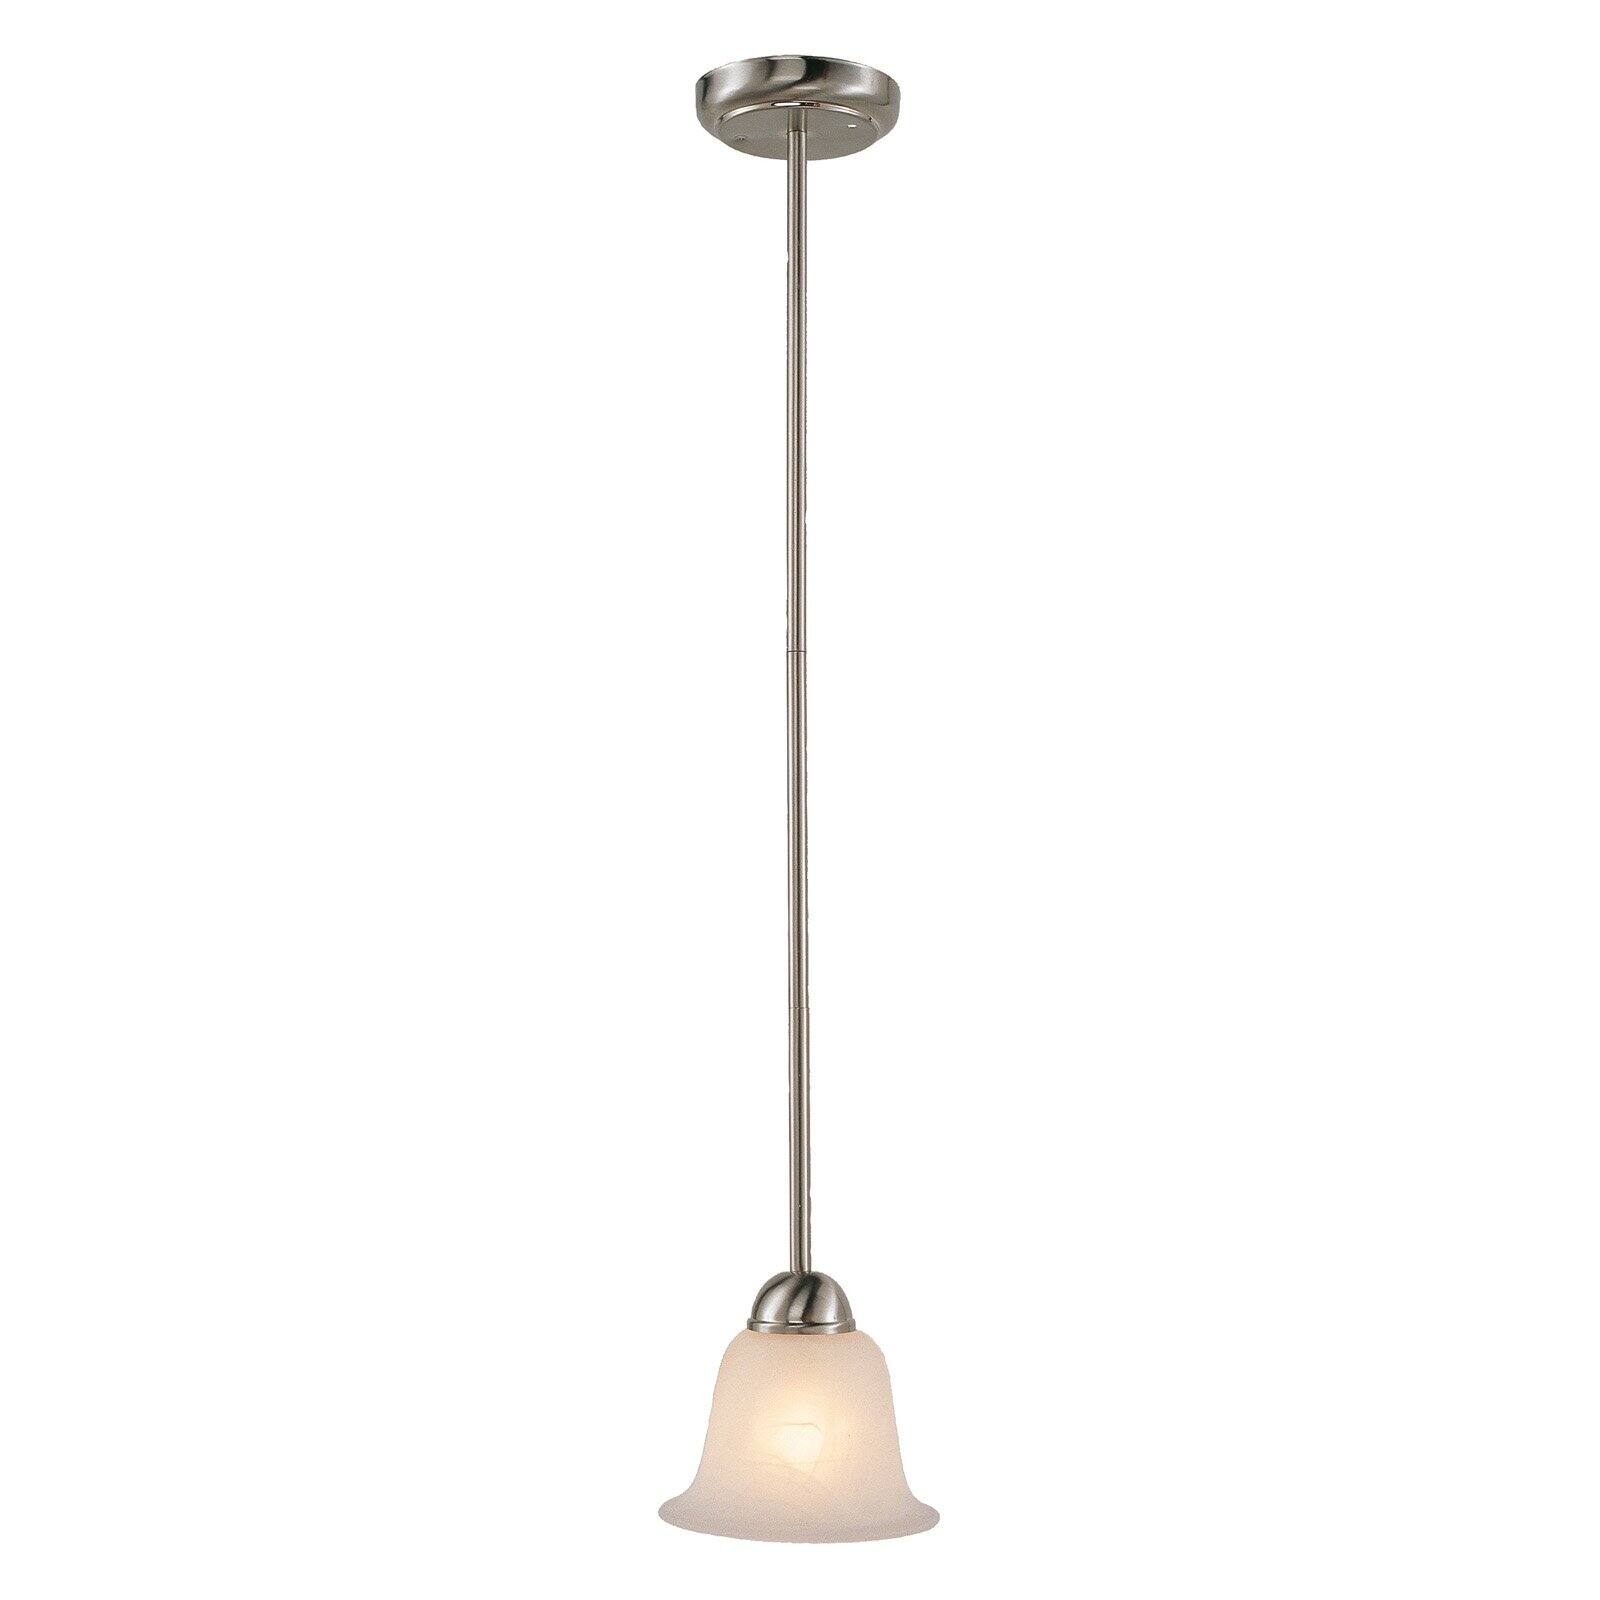 Transglobe 9282 Drop Pendant - 6.5W in. - image 2 of 2